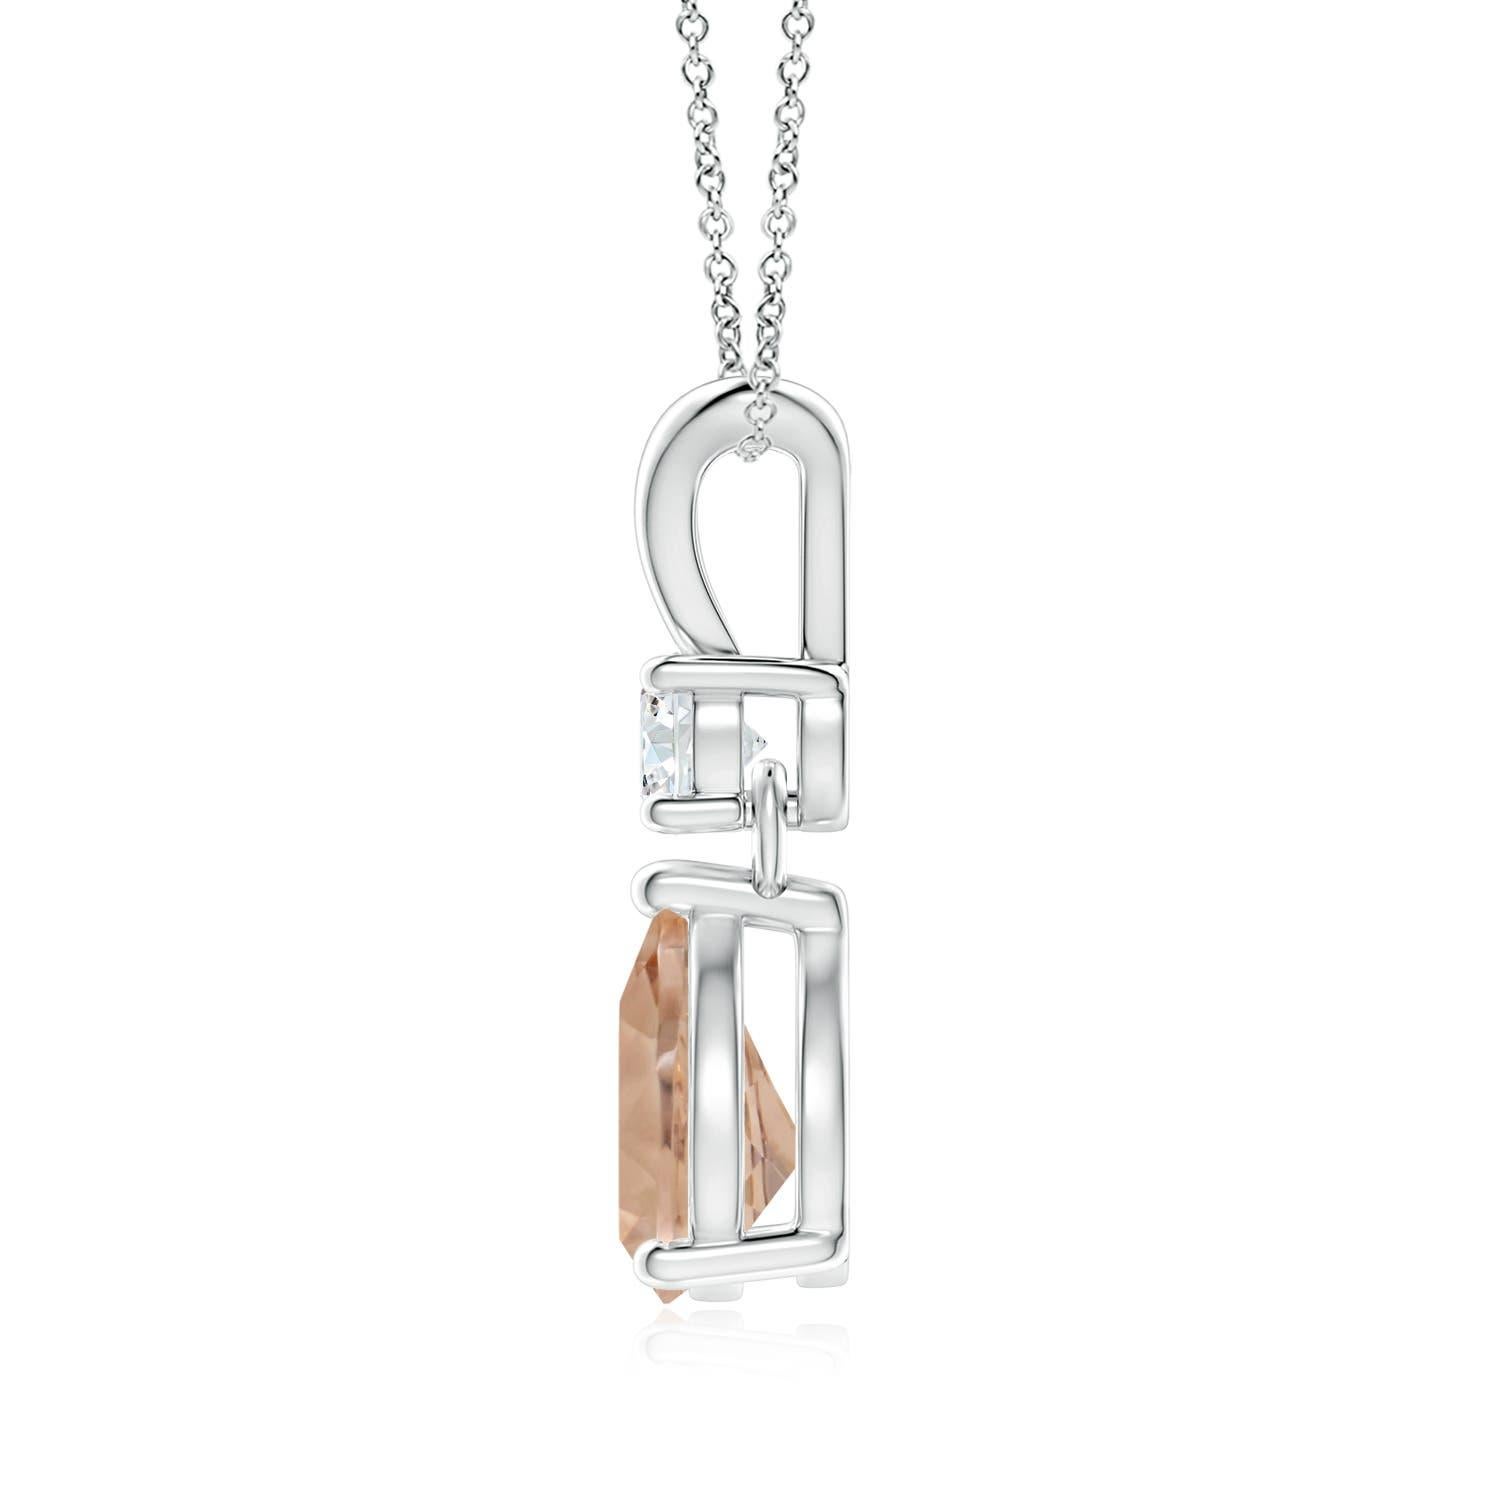 The GIA certified pear-shaped morganite is mounted in a prong setting. It is topped with a sparkling diamond and linked to a stylish V-bale. This platinum pendant has an unmissable feminine flair.
